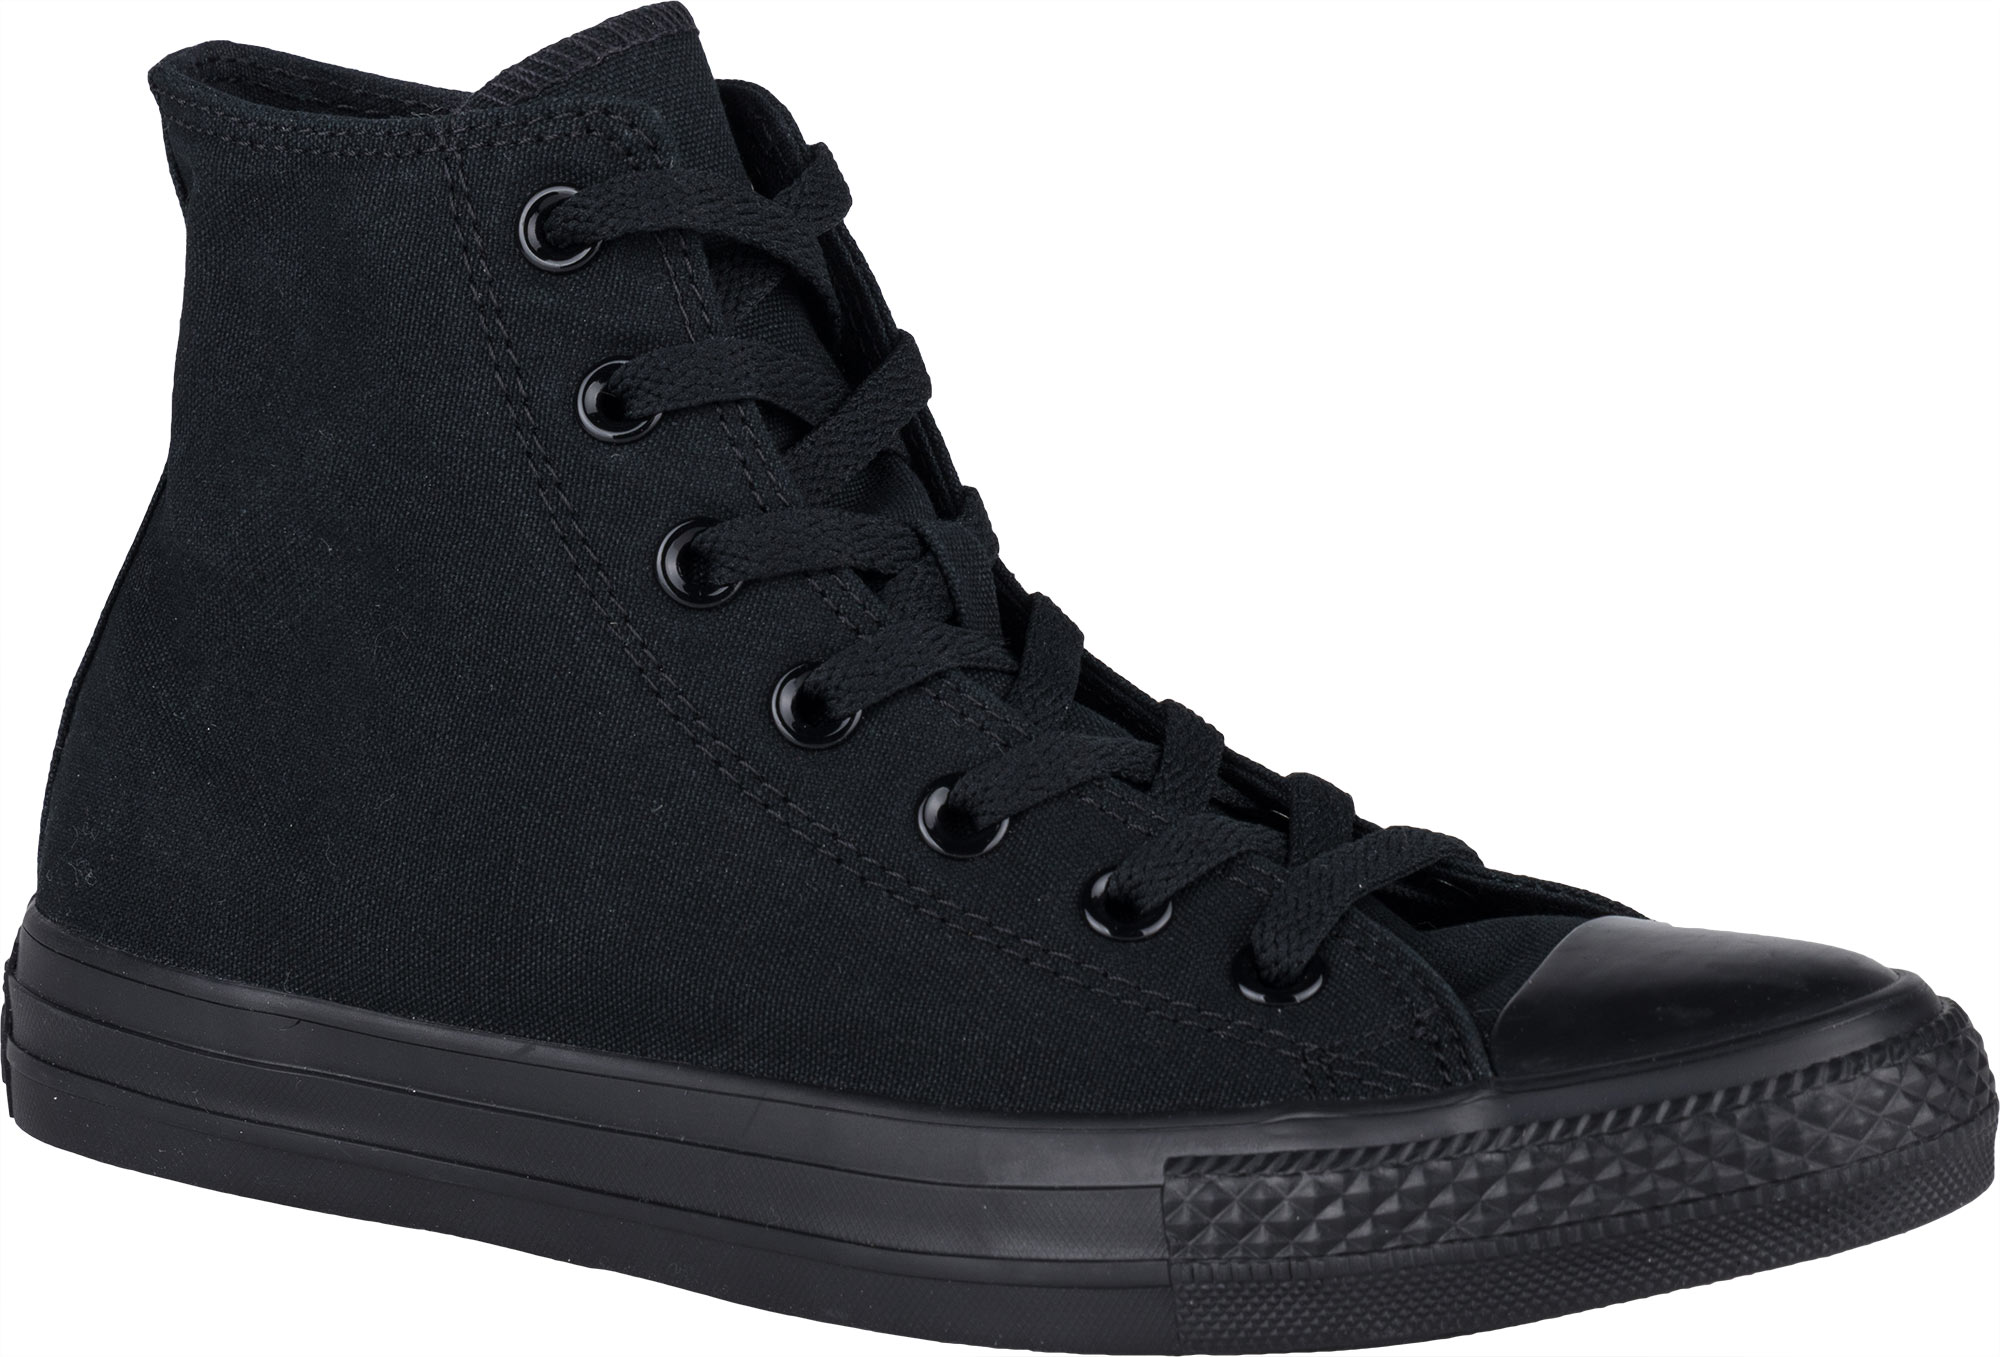 CHUCK TAYLOR ALL STAR - Unisex Shoes